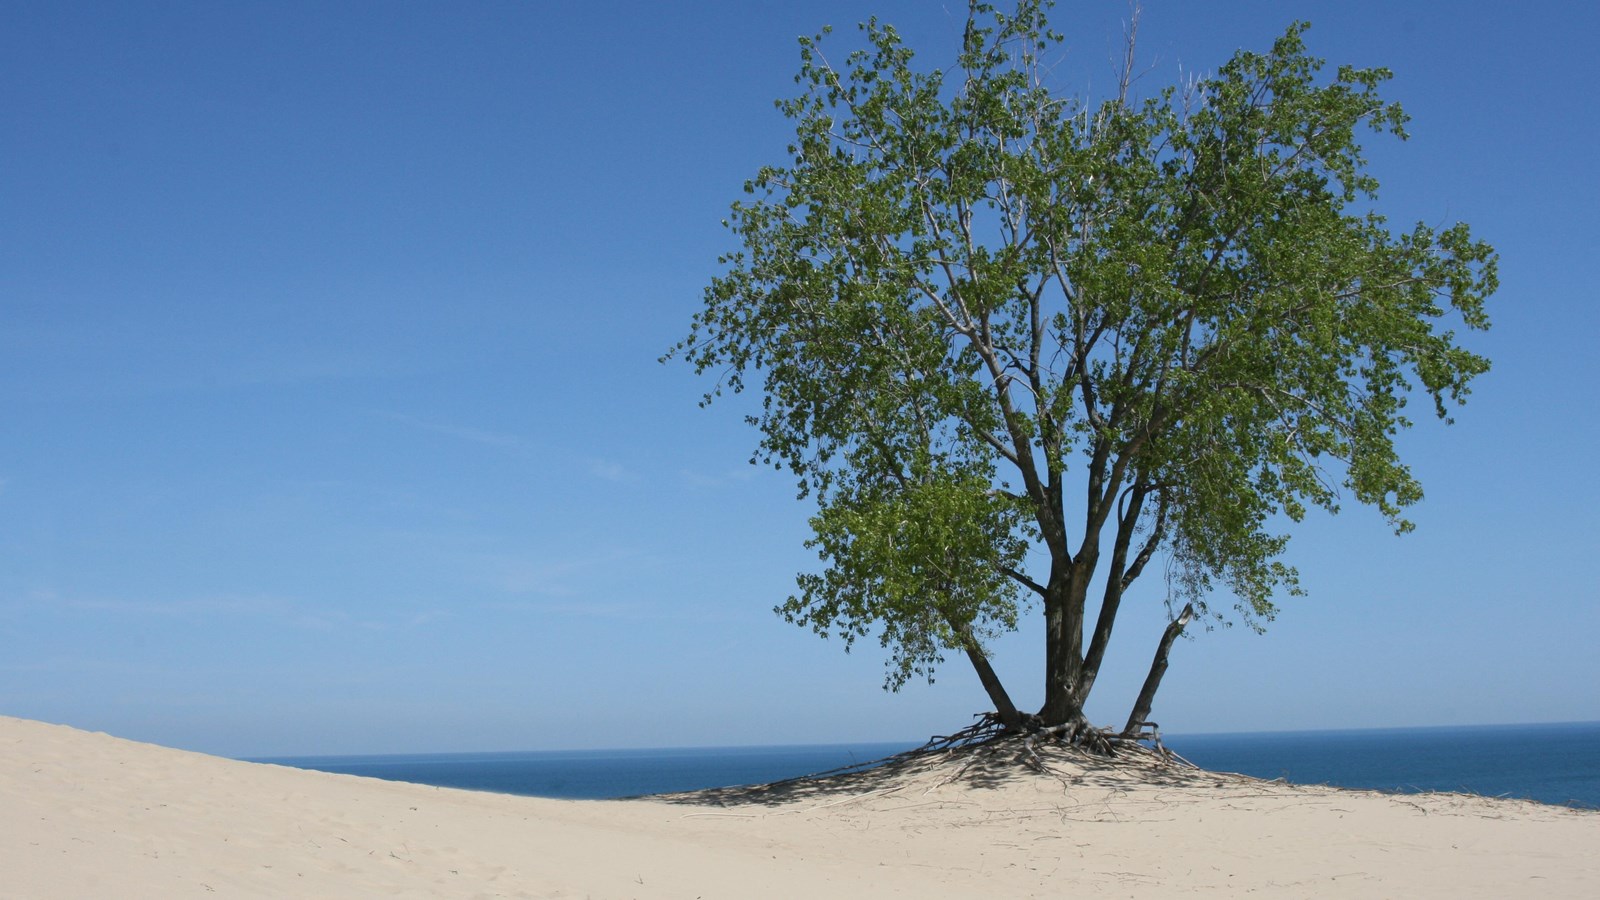 A lone cottonwood tree with deep green leaves emerge from the yellow sand along the shoreline.